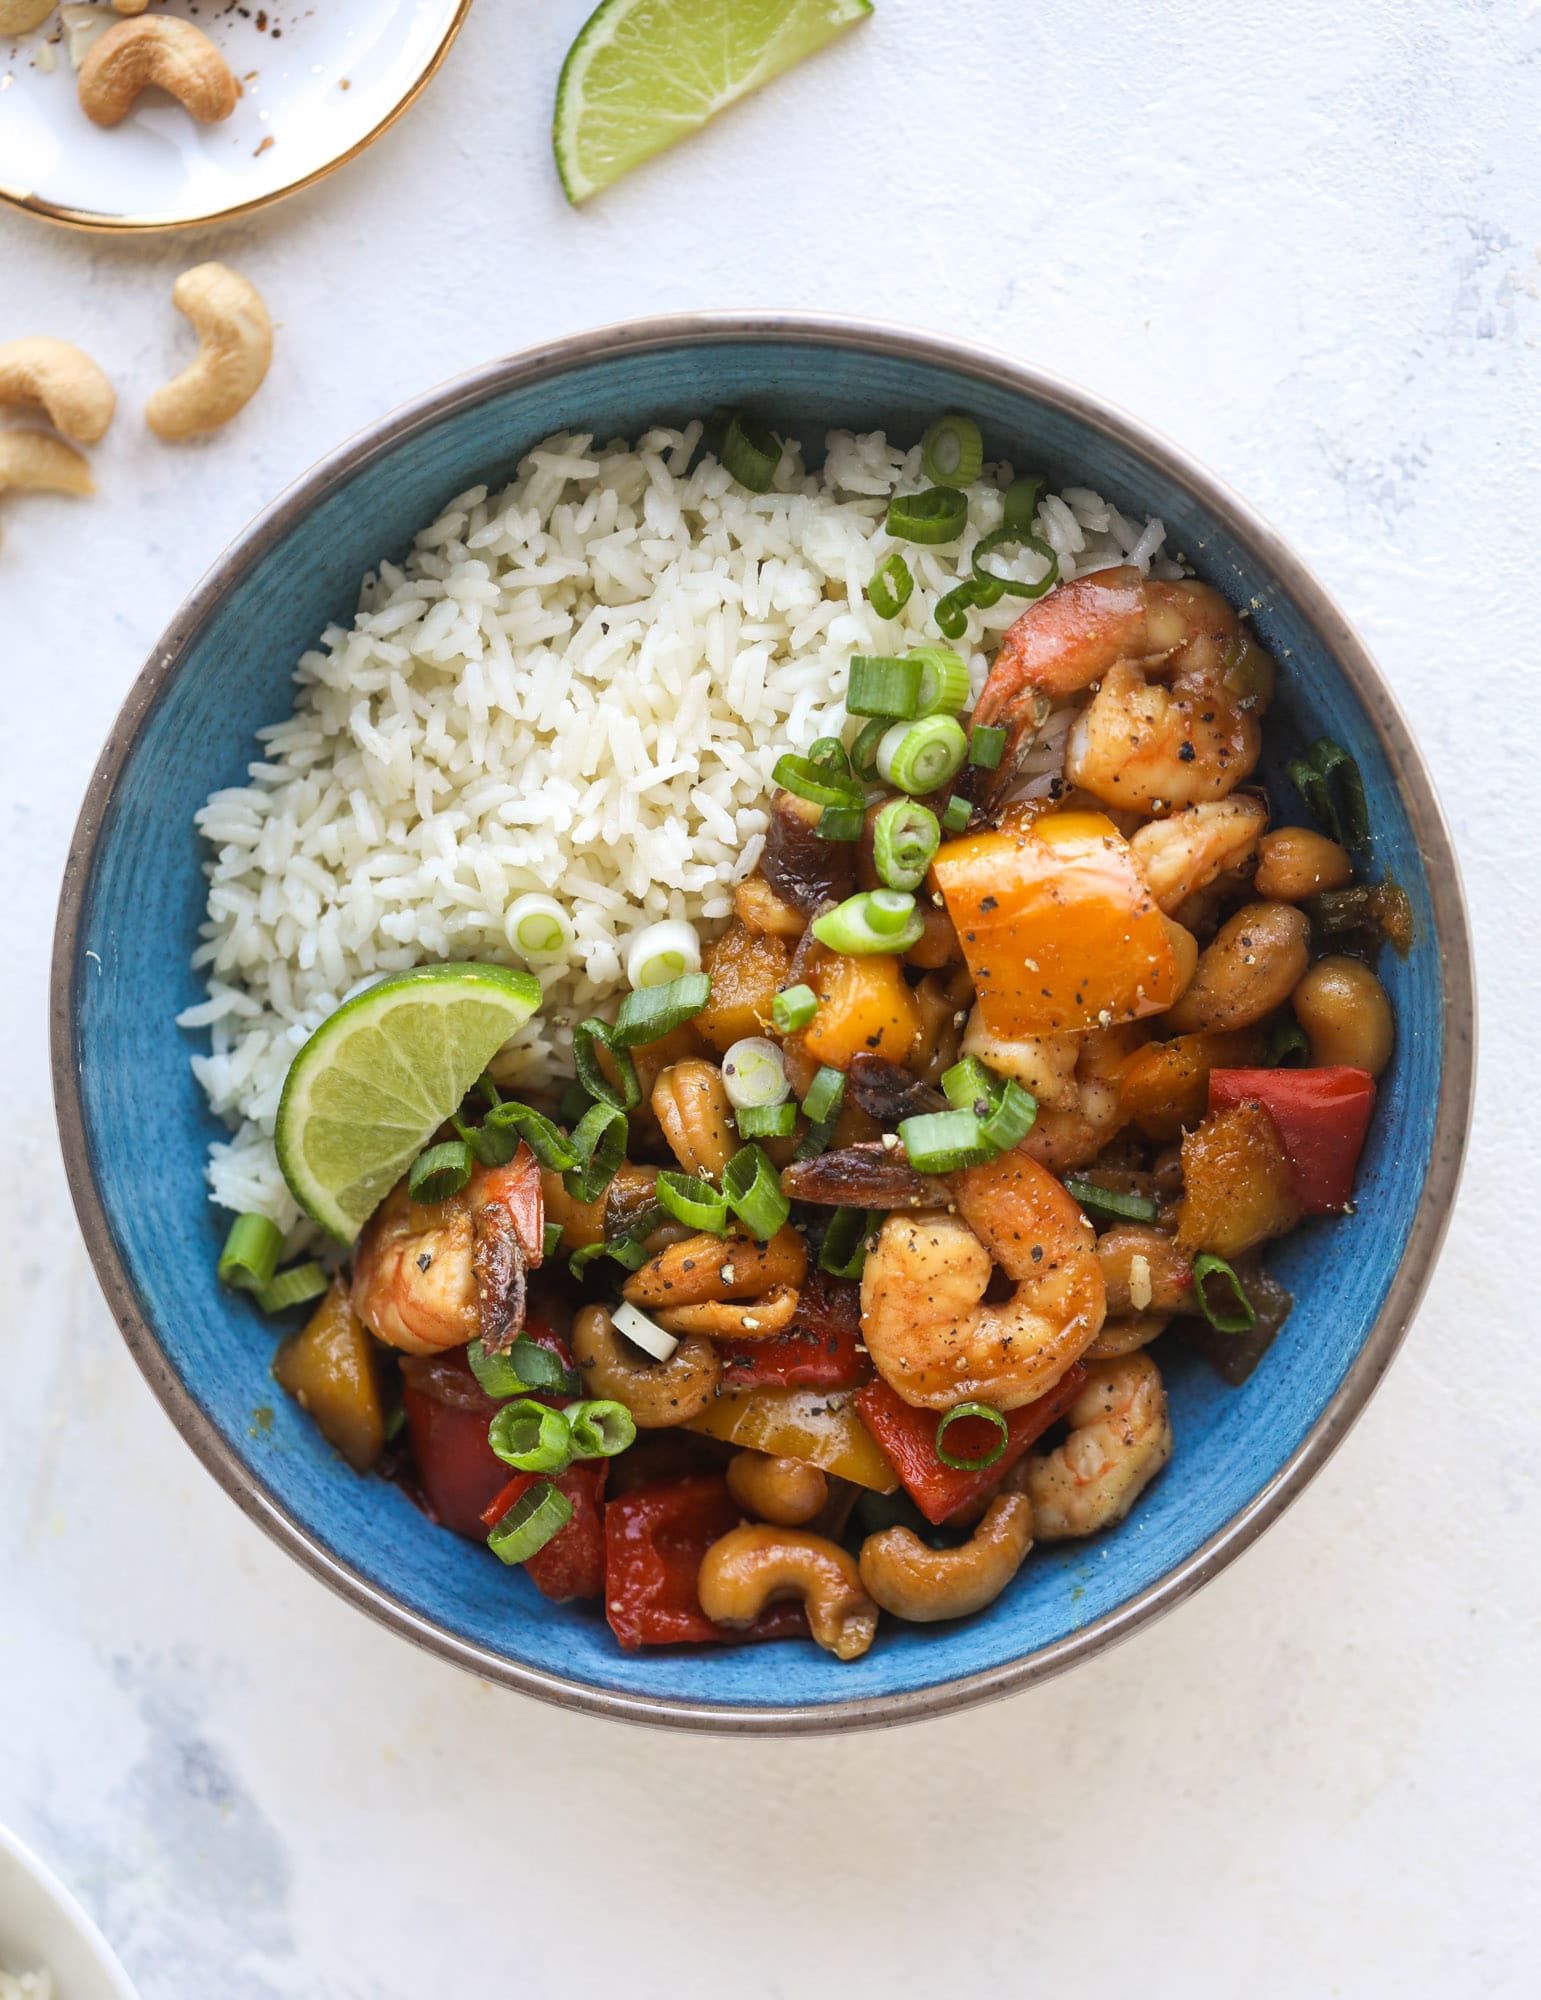 This cashew shrimp stir fry is a super simple weeknight meal! Made with bell peppers and mango, it is delicious over rice and comes together in 25 minutes. I howsweeteats.com #cashew #shrimp